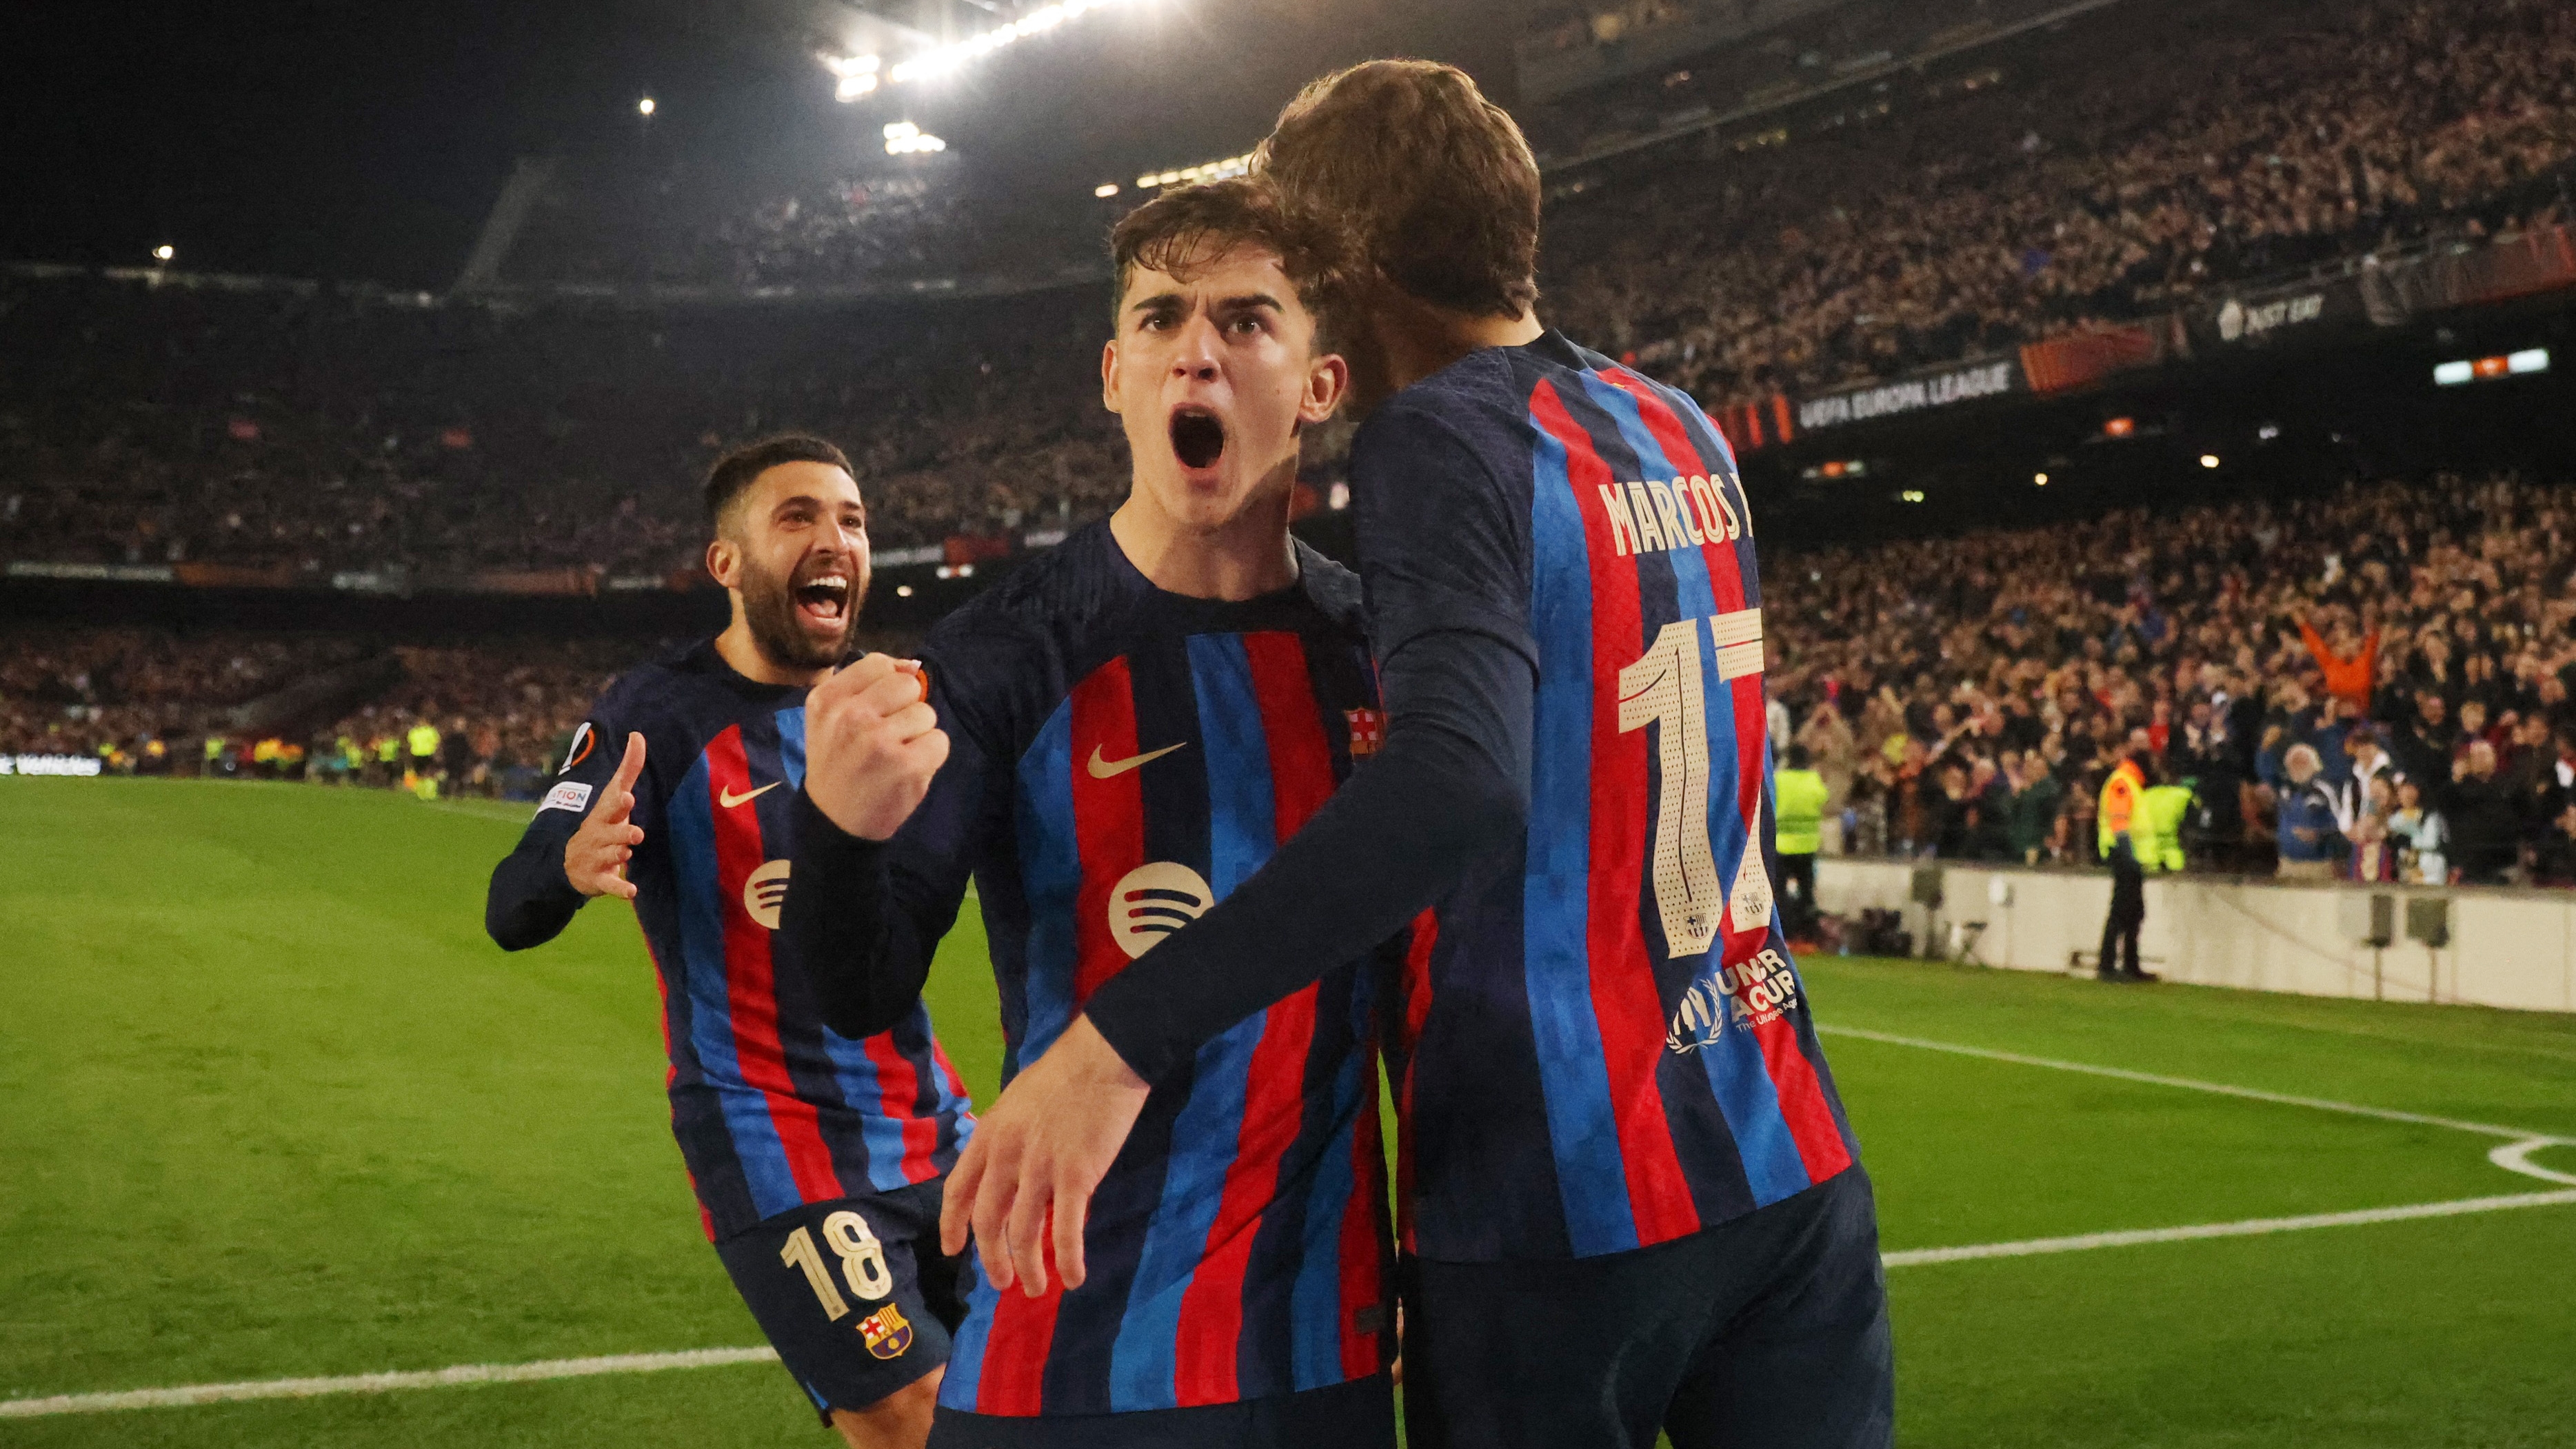 Soccer Football - Europa League - Play-Off First Leg - FC Barcelona v Manchester United - Camp Nou, Barcelona, Spain - February 16, 2023  FC Barcelona's Marcos Alonso celebrates scoring their first goal with teammates REUTERS/Nacho Doce